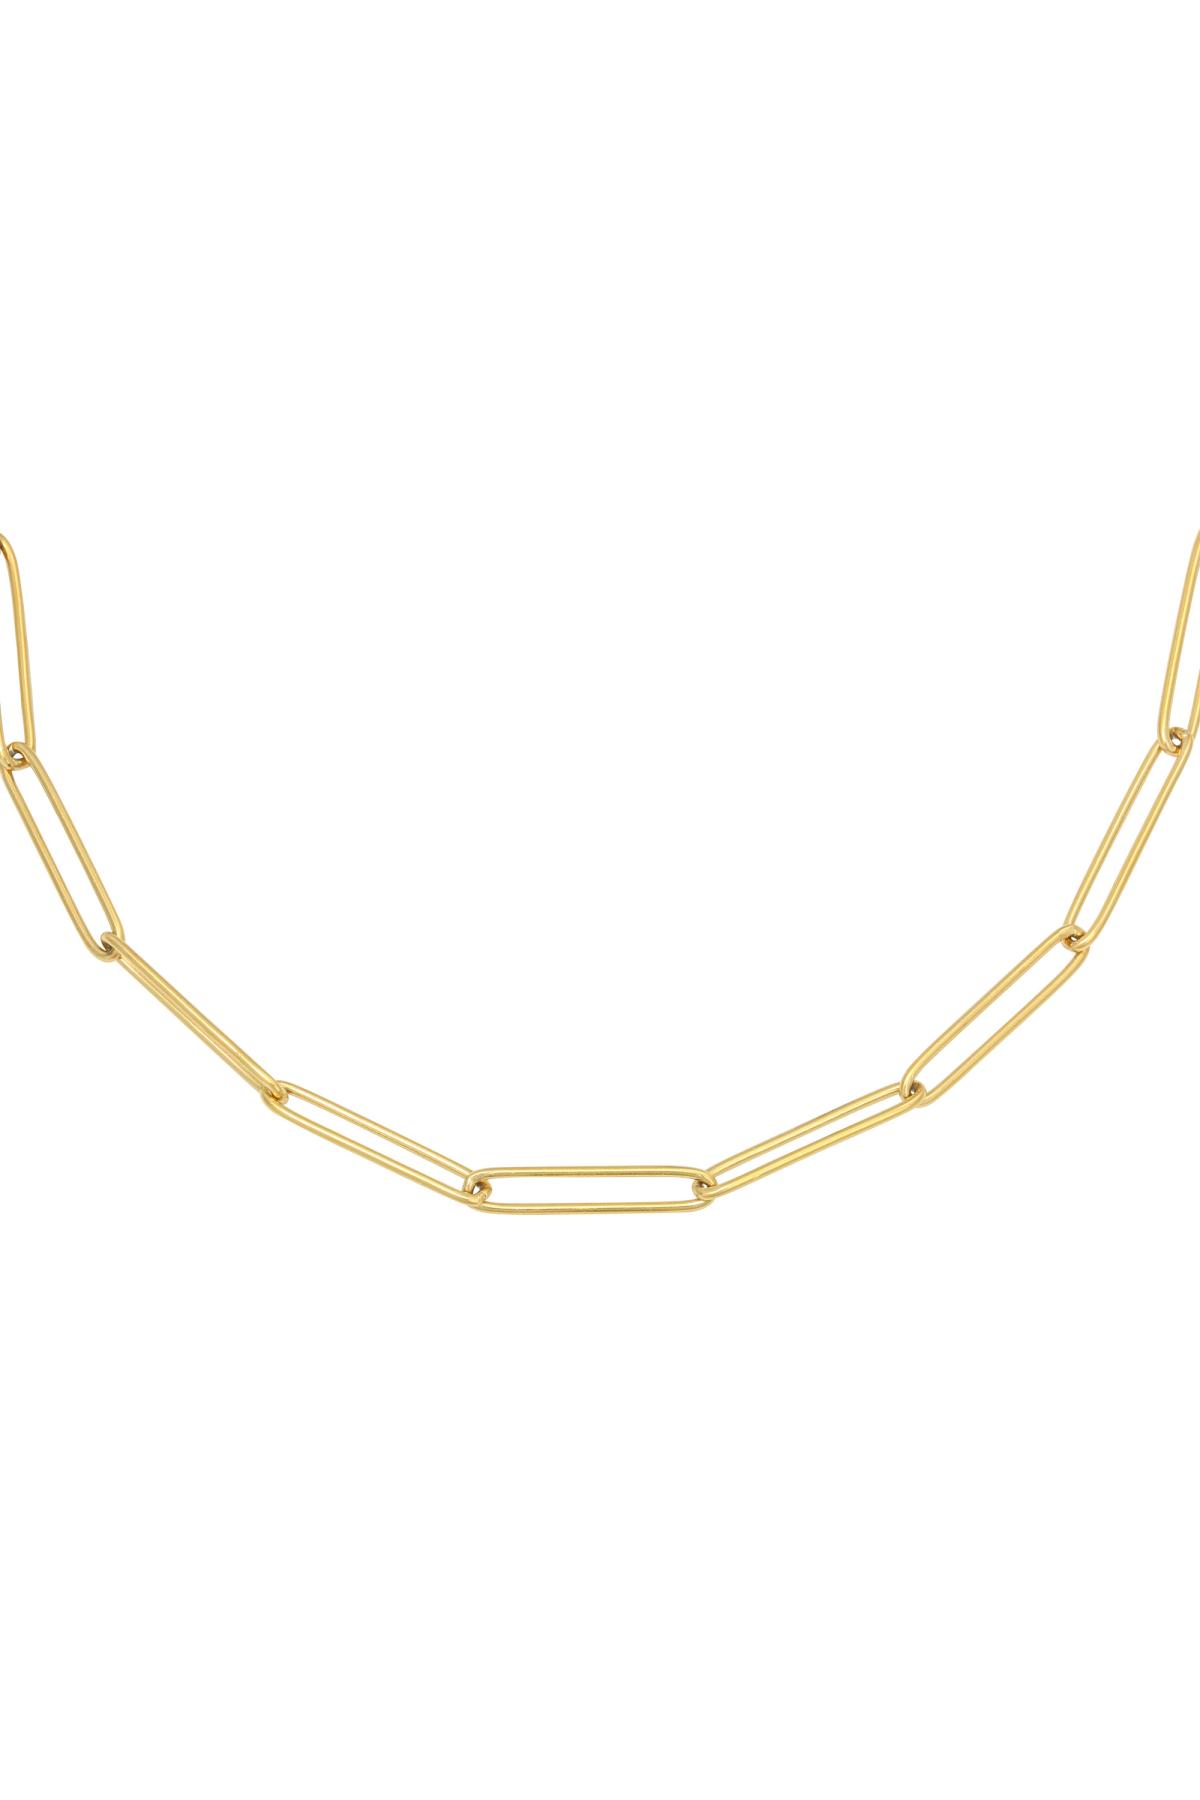 Necklace Plain Chain Gold Stainless Steel